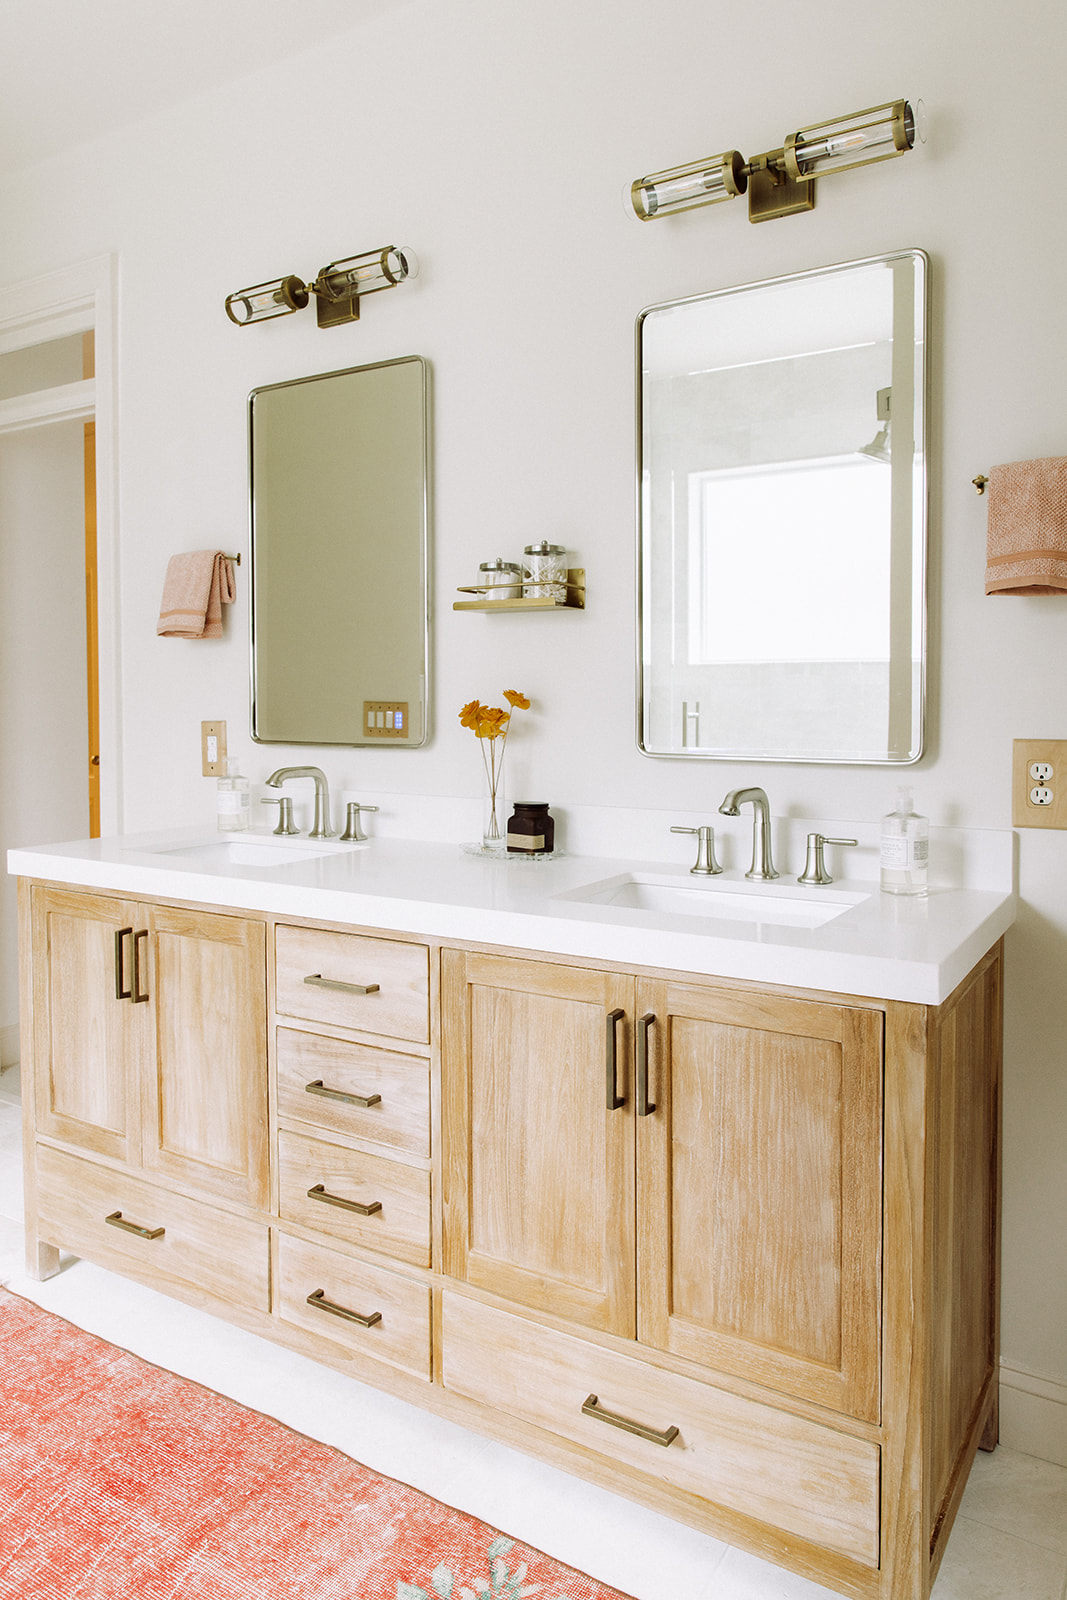 bathroom-wood-vanity-amber-interiors-inspired-willow-vanities Revealing the After! Our Full Bathroom Renovation